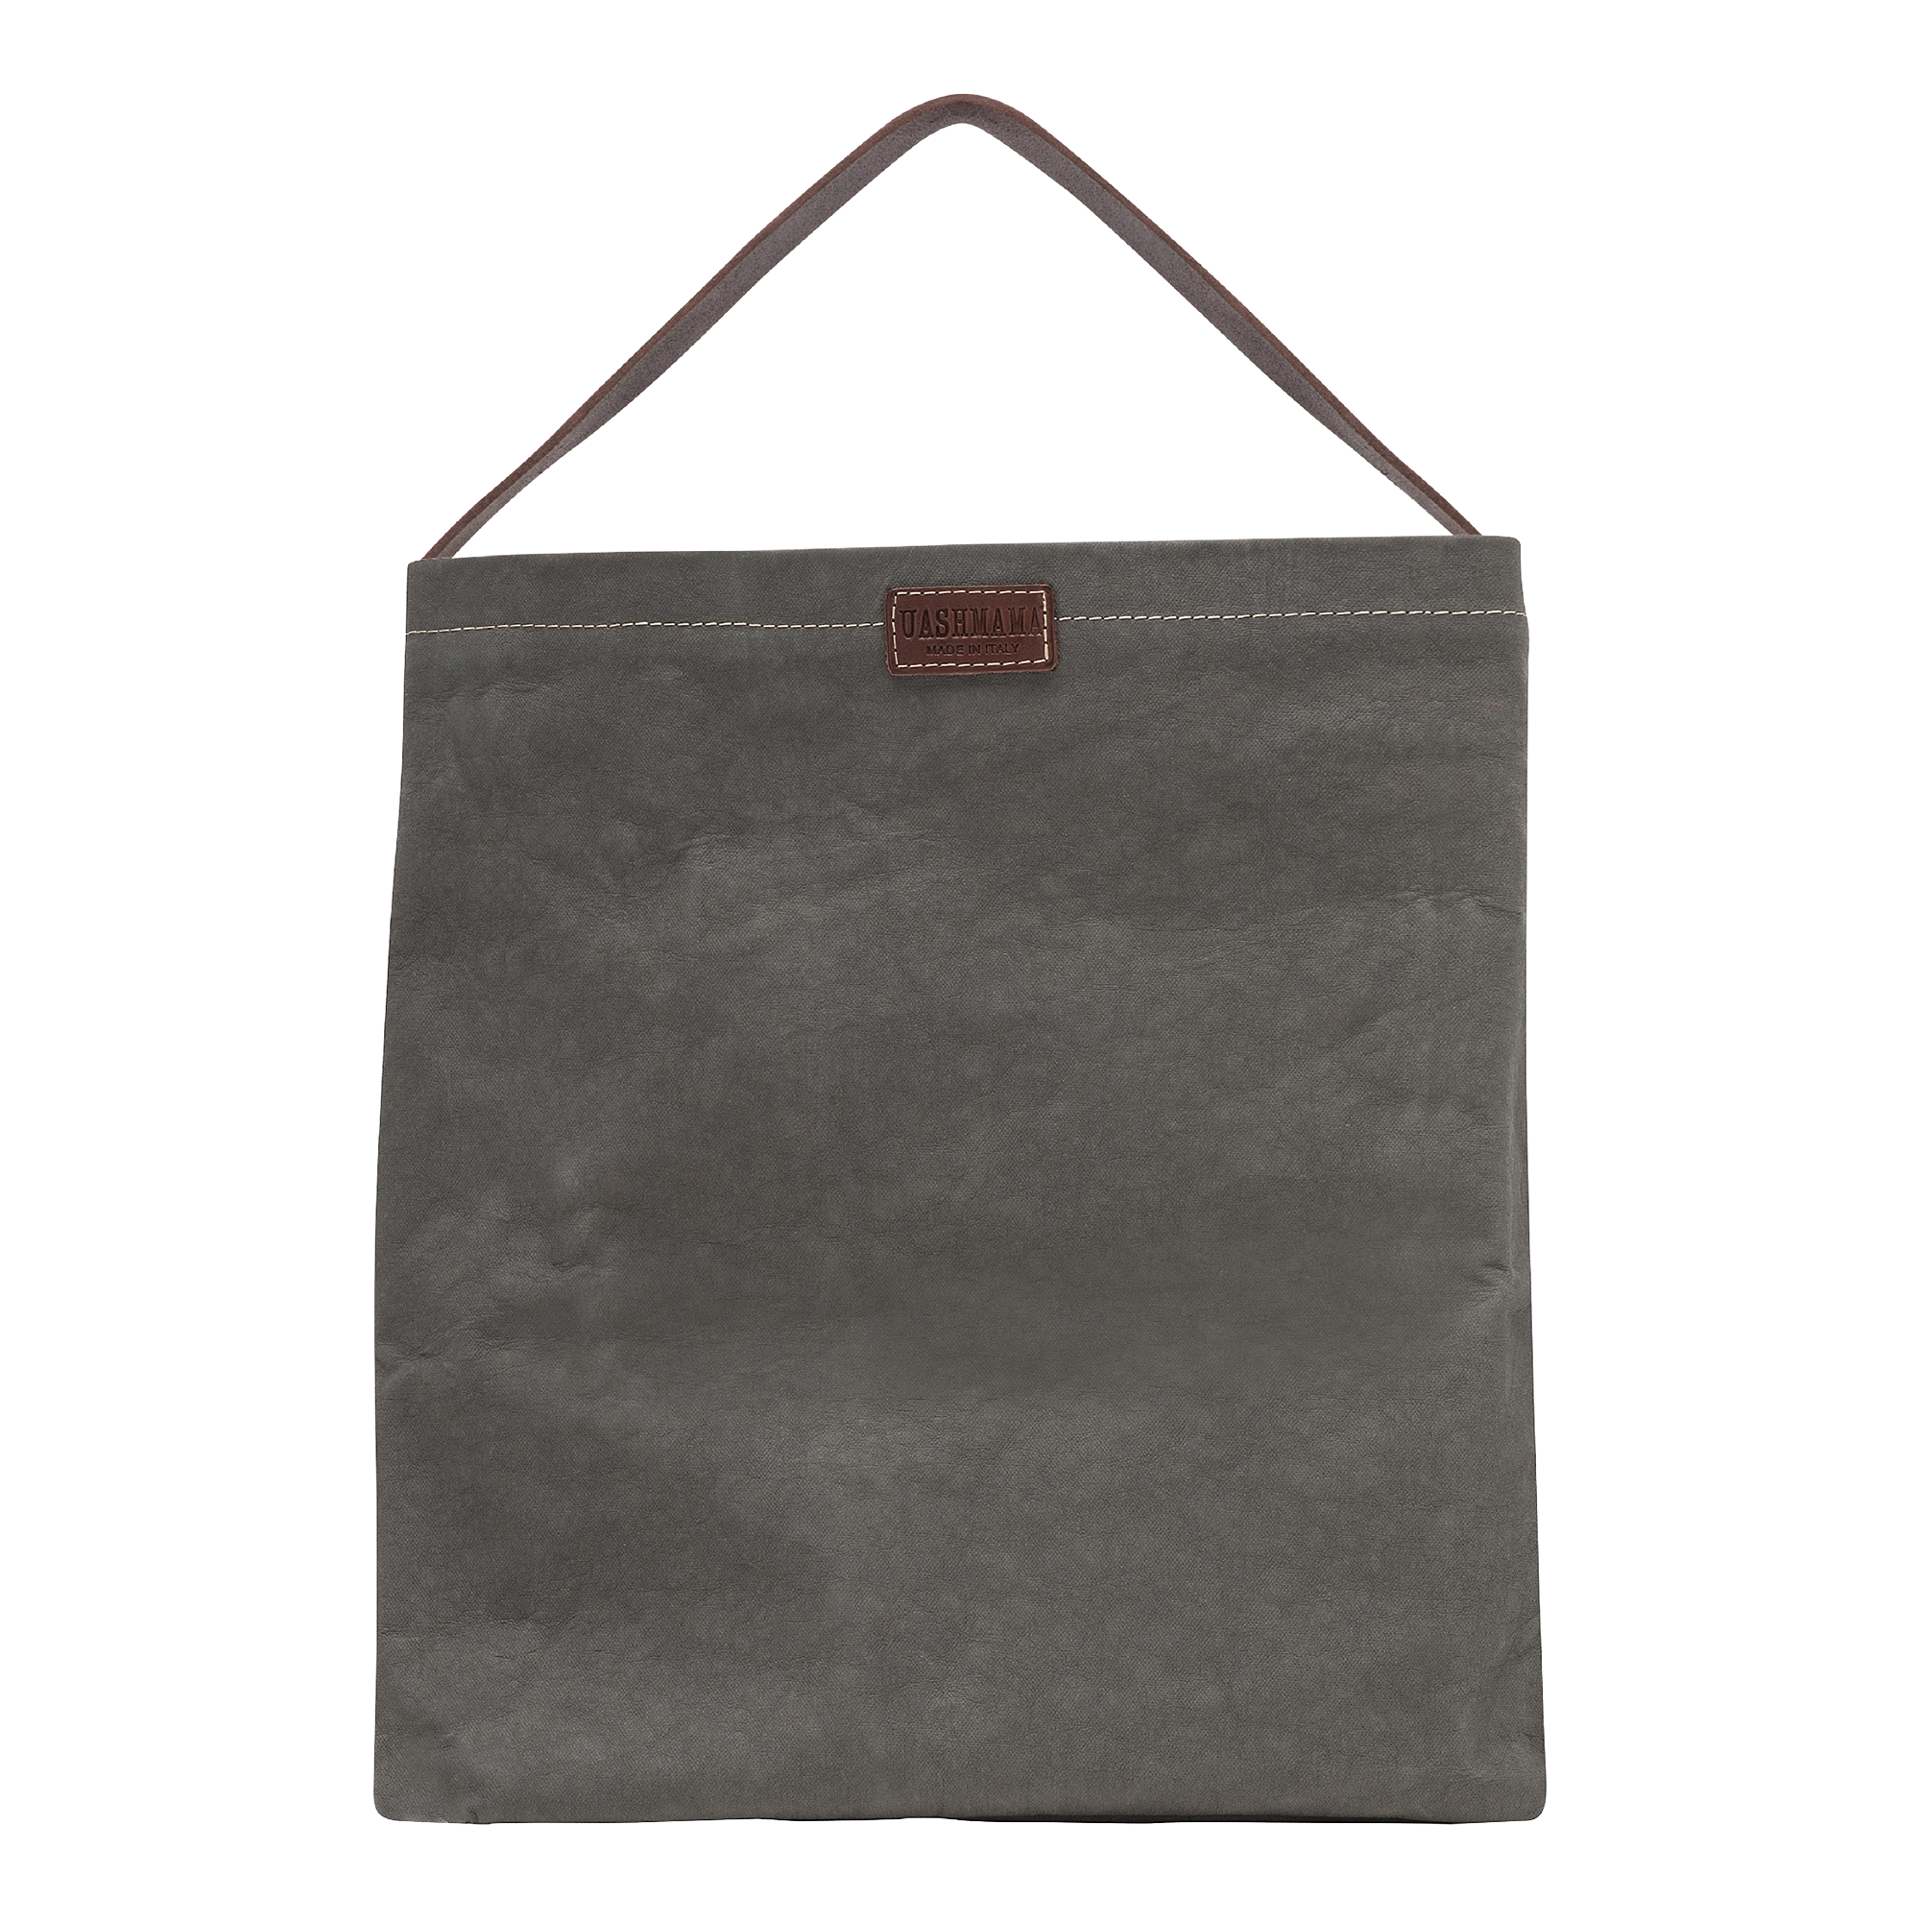 A grey washable paper handbag is shown from the front. It features a singular top handle in chocolate brown, and a brown UASHMAMA logo stamp on the front.